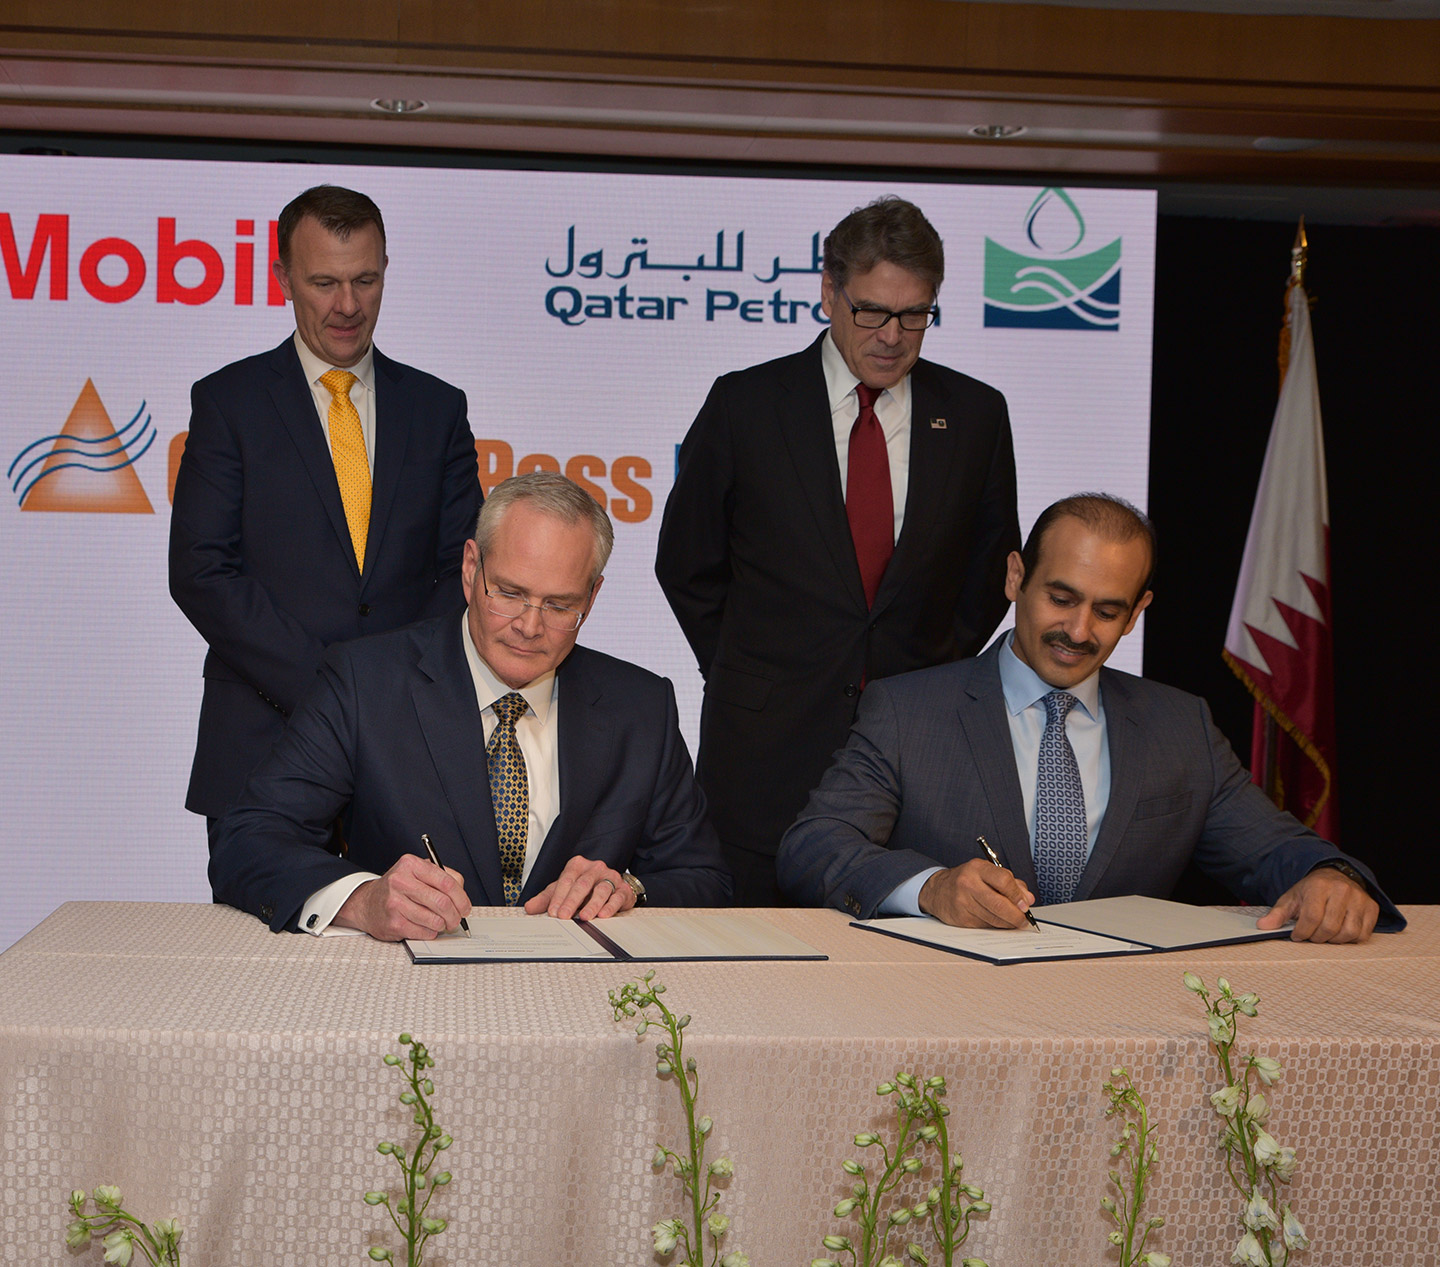 ExxonMobil Chairman and CEO Darren Woods and Qatar Petroleum President and CEO H.E. Saad Al-Kaabi sign agreement to proceed with construction of the Golden Pass LNG export facility as United States Energy Secretary Rick Perry and Golden Pass Products CEO Sean Ryan look on.